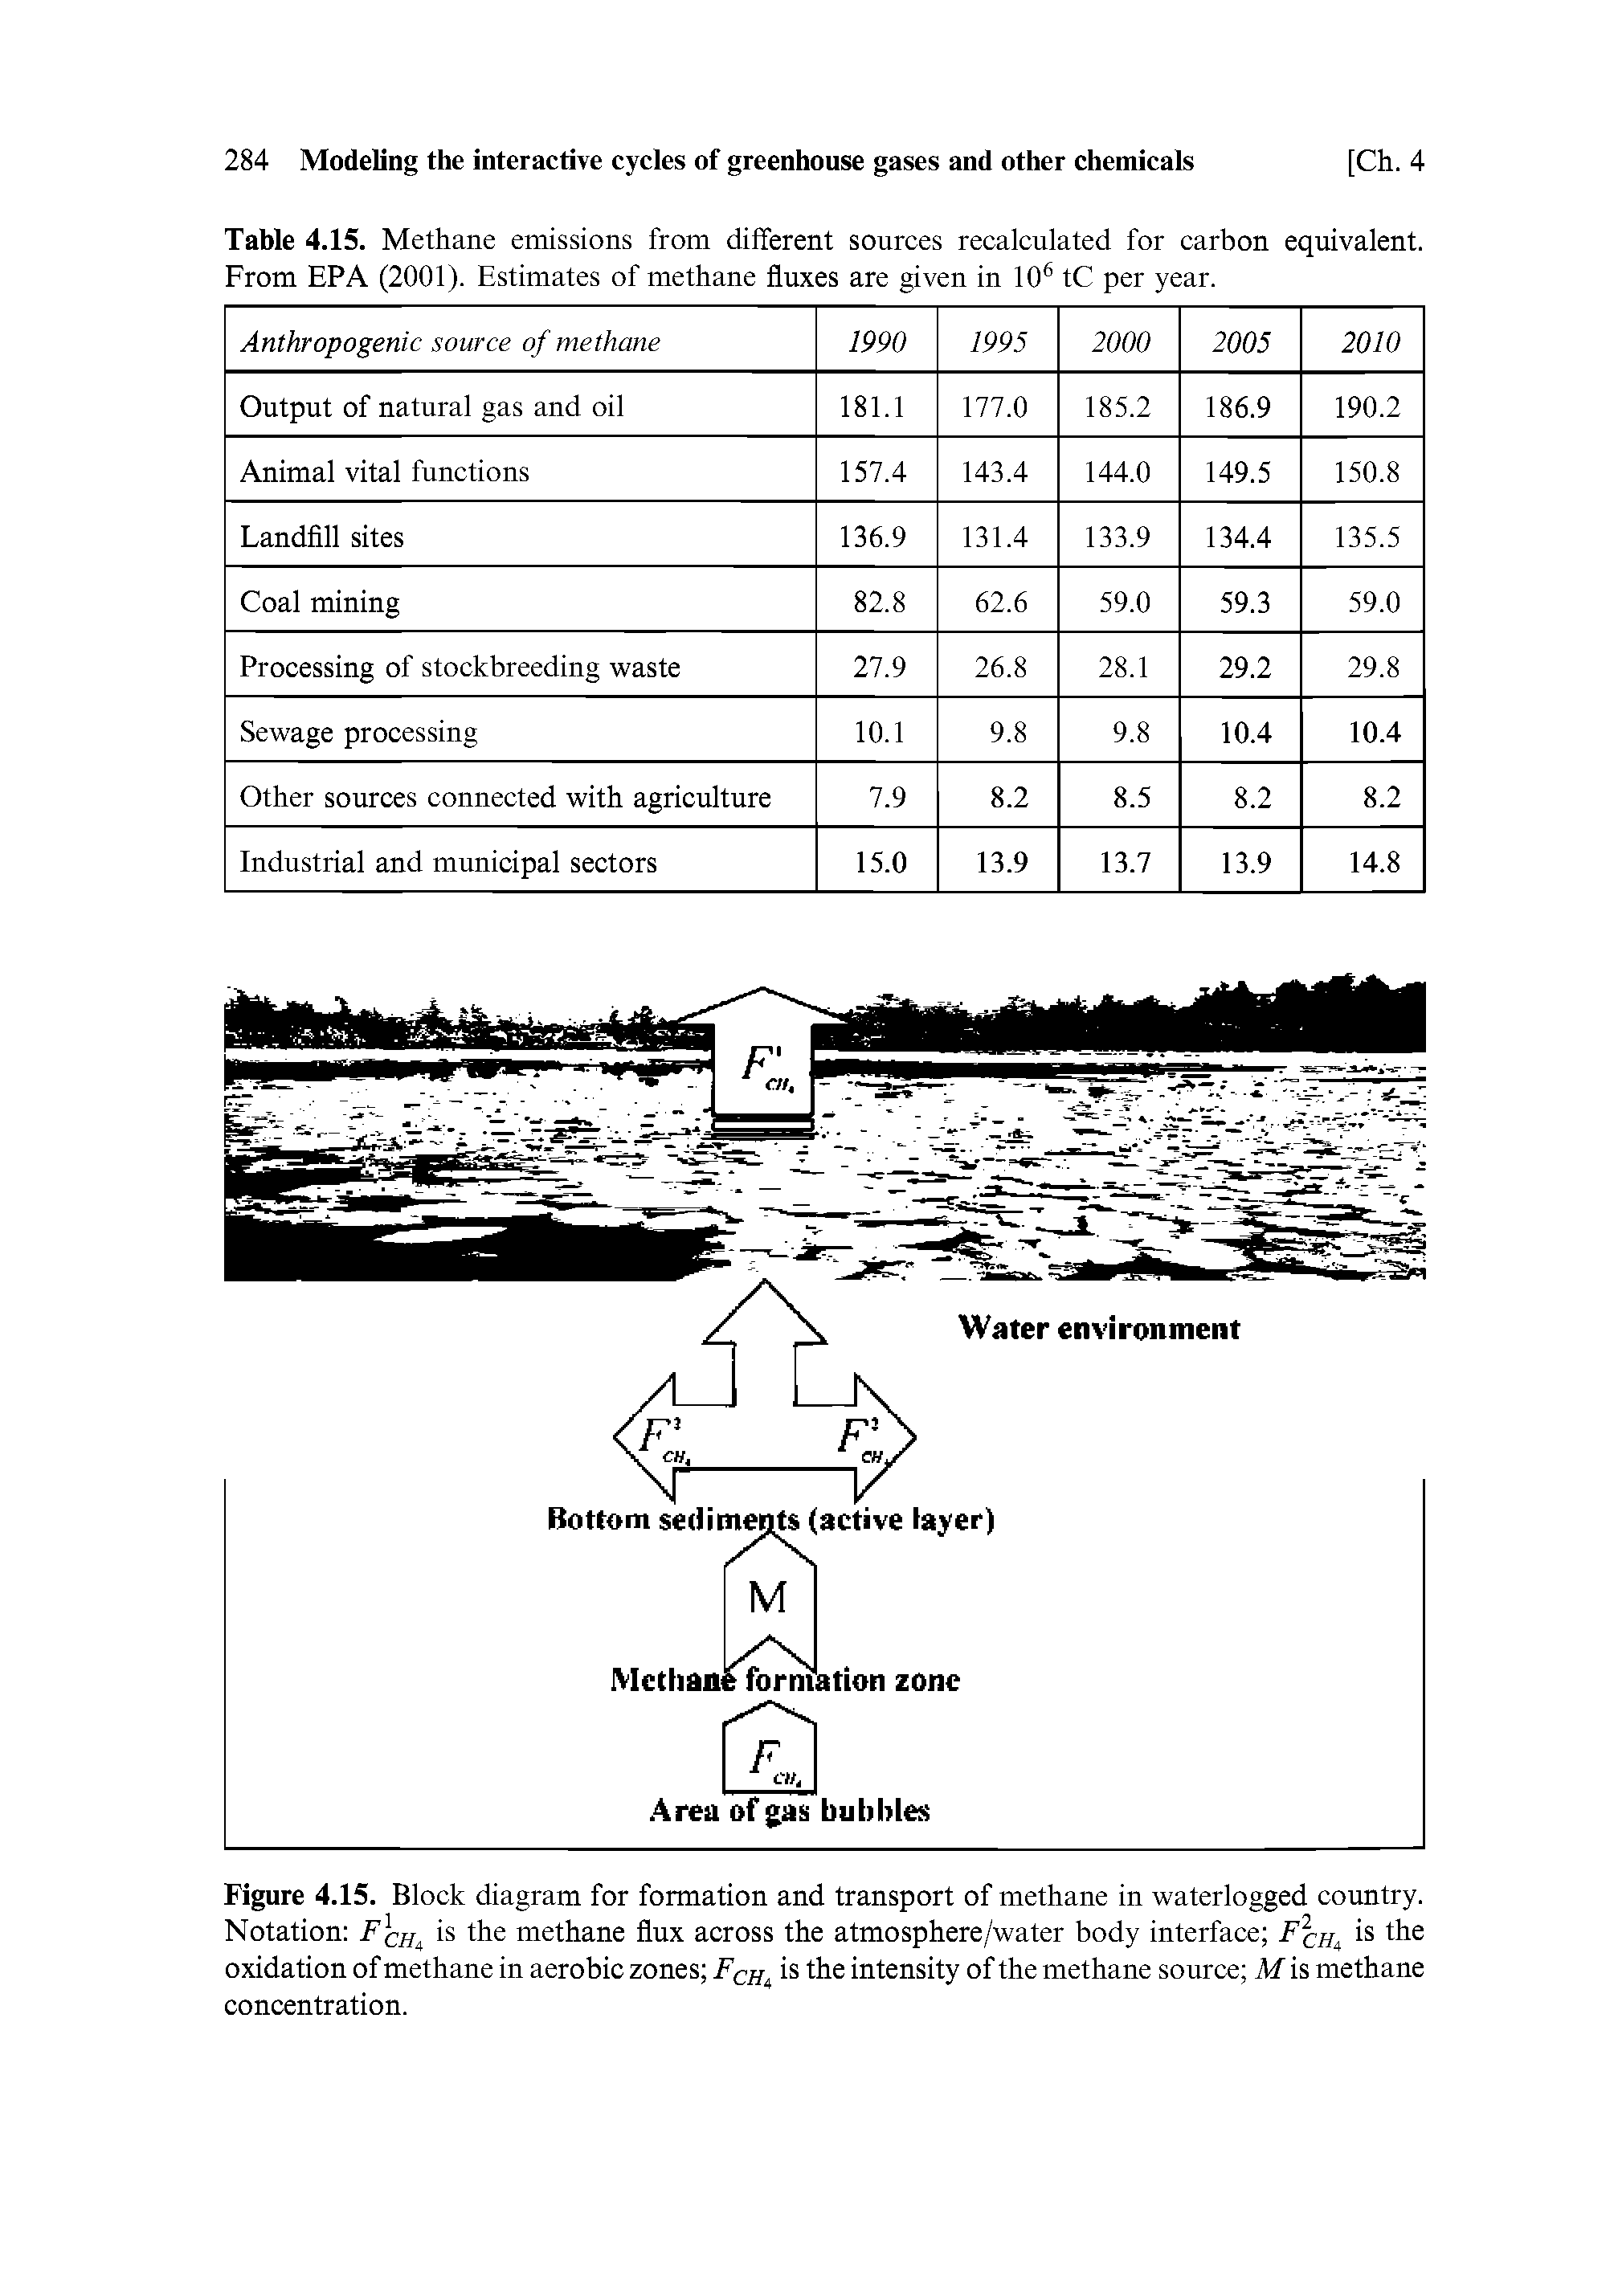 Figure 4.15. Block diagram for formation and transport of methane in waterlogged country. Notation FlCHi is the methane flux across the atmosphere/water body interface F2CHi is the oxidation of methane in aerobic zones FCH is the intensity of the methane source M is methane concentration.